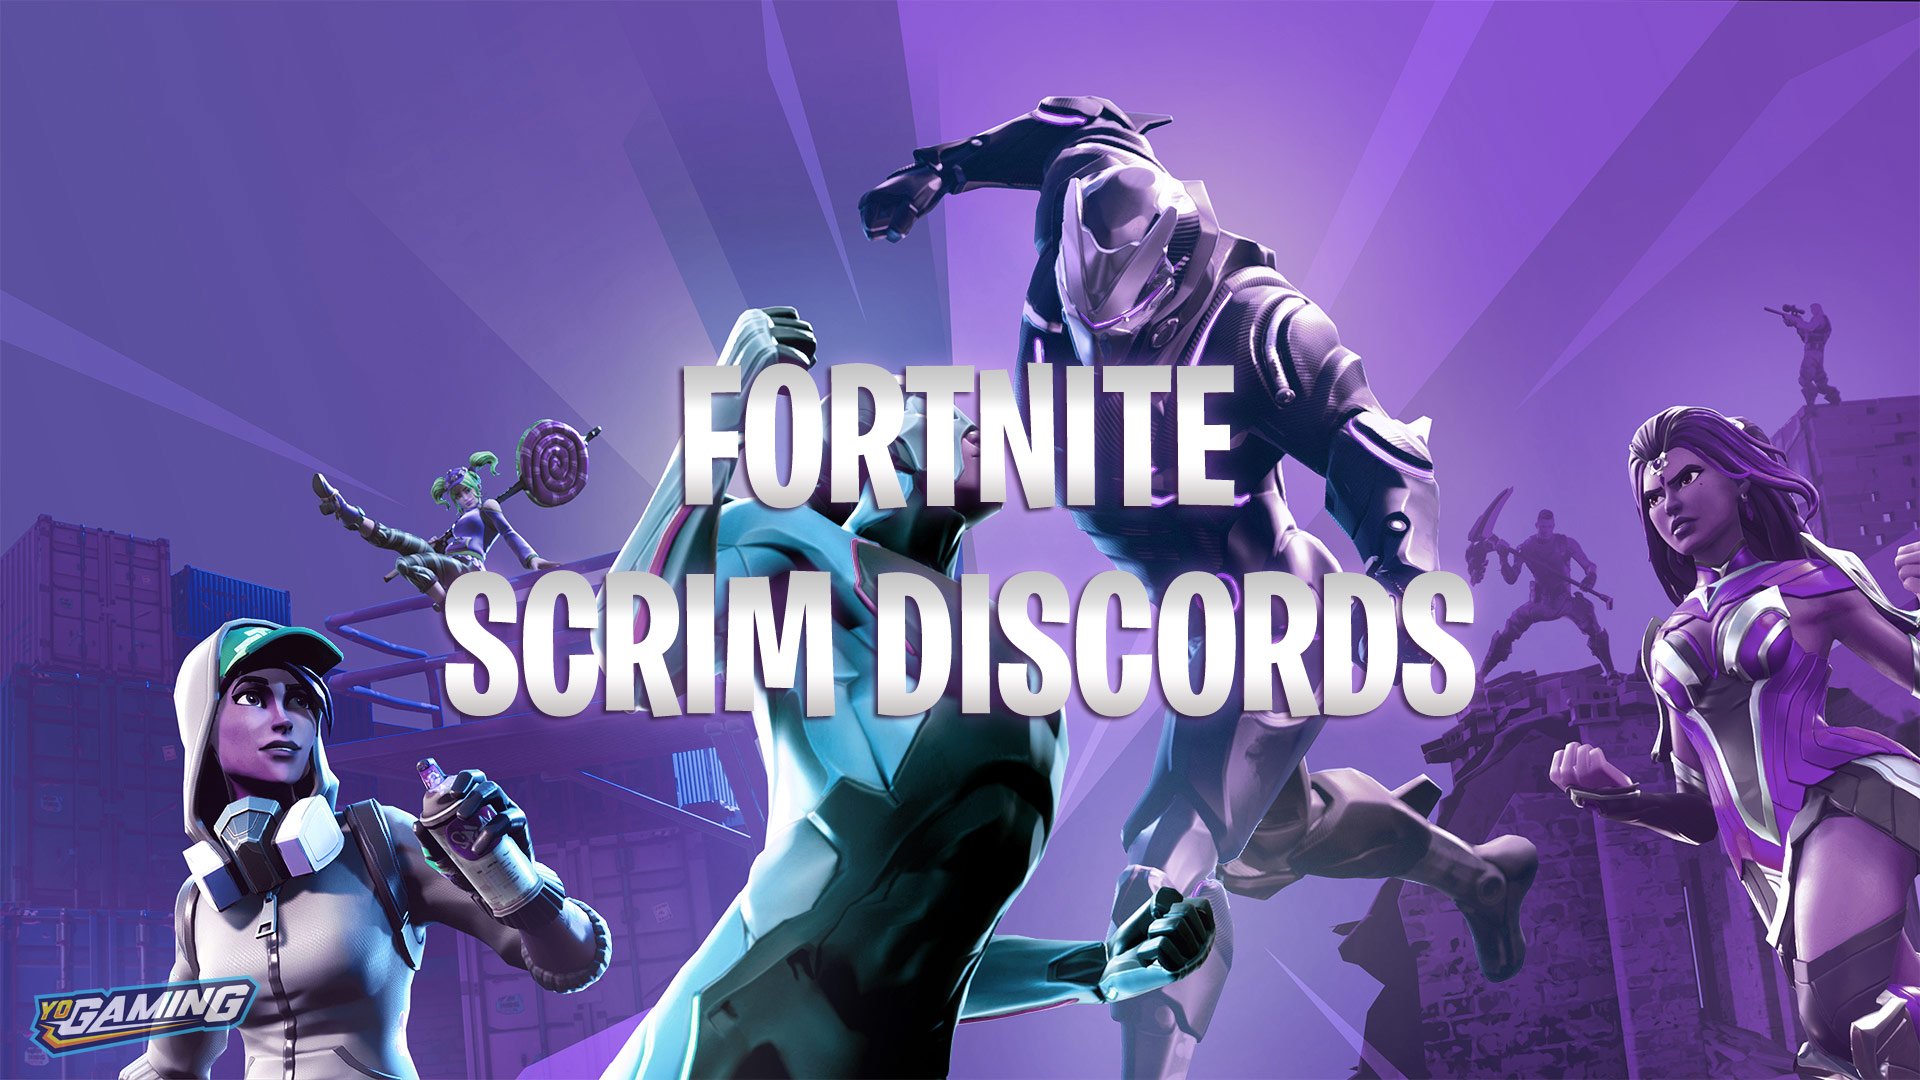 Fortnite Discords With Pro Scrims Snipes Solo Duo Squad - fortnite discords with pro scrims snipes solo duo squad updated april 2019